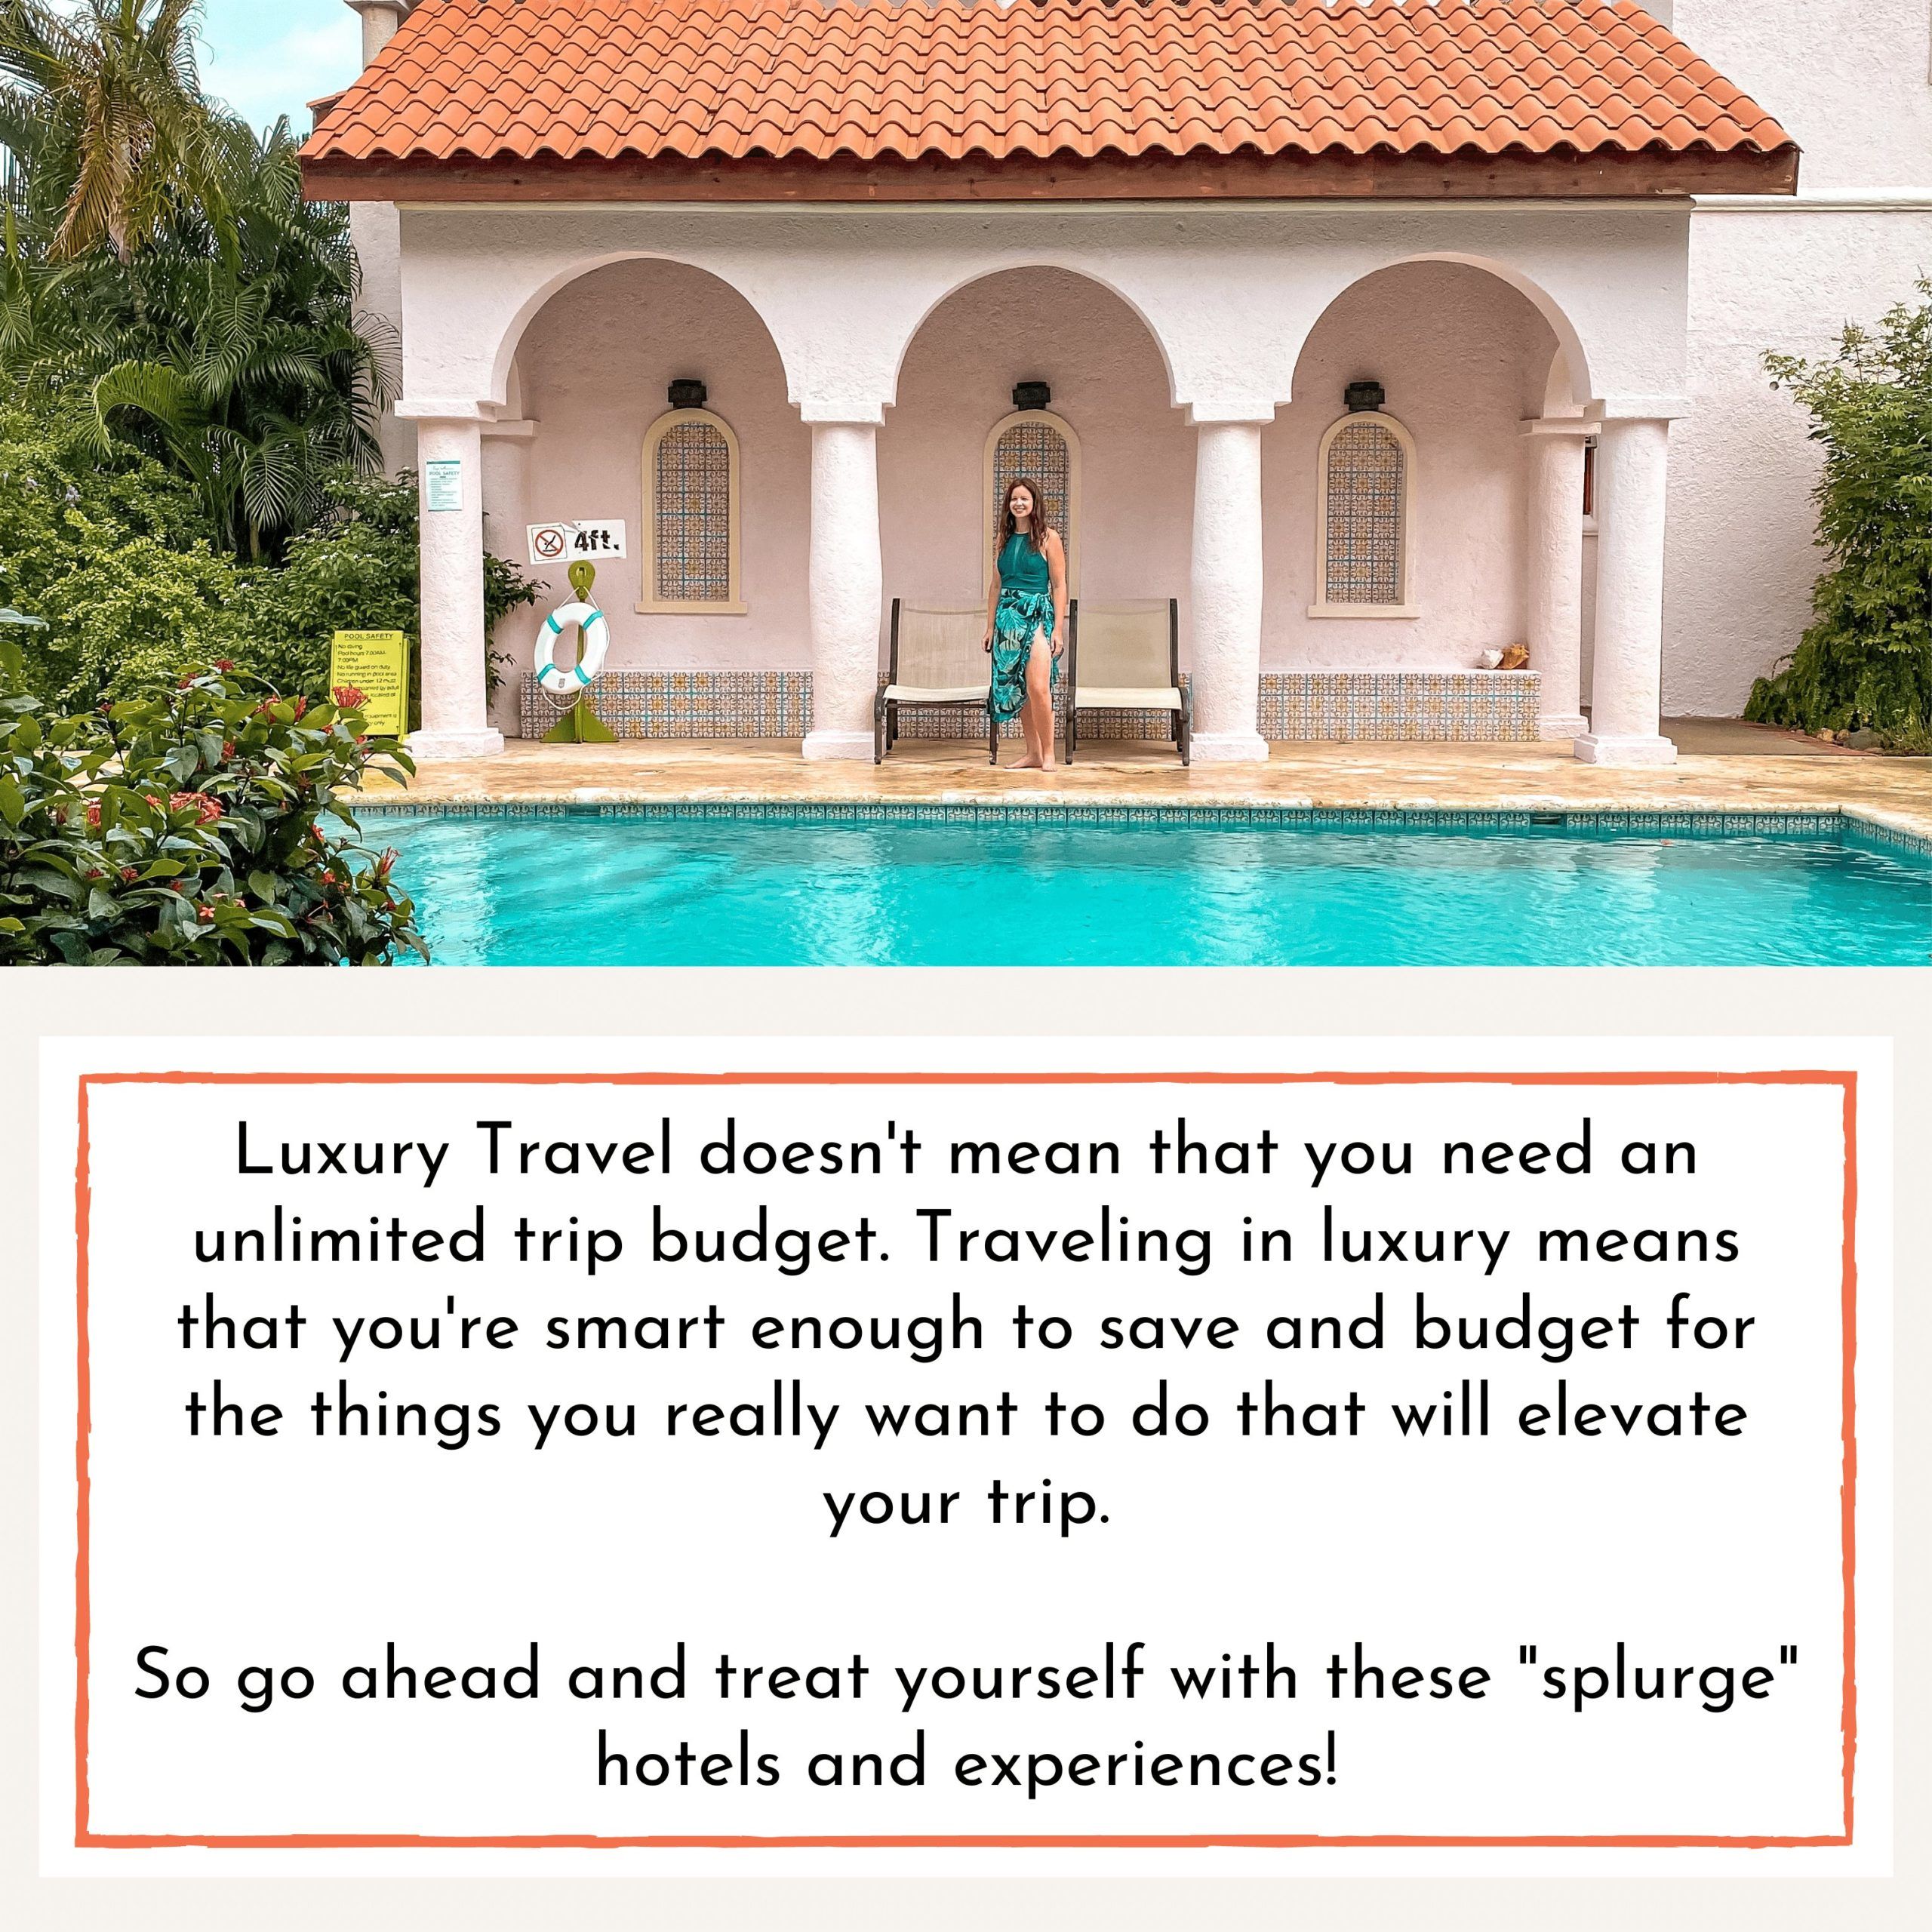 Luxury Travel Guide